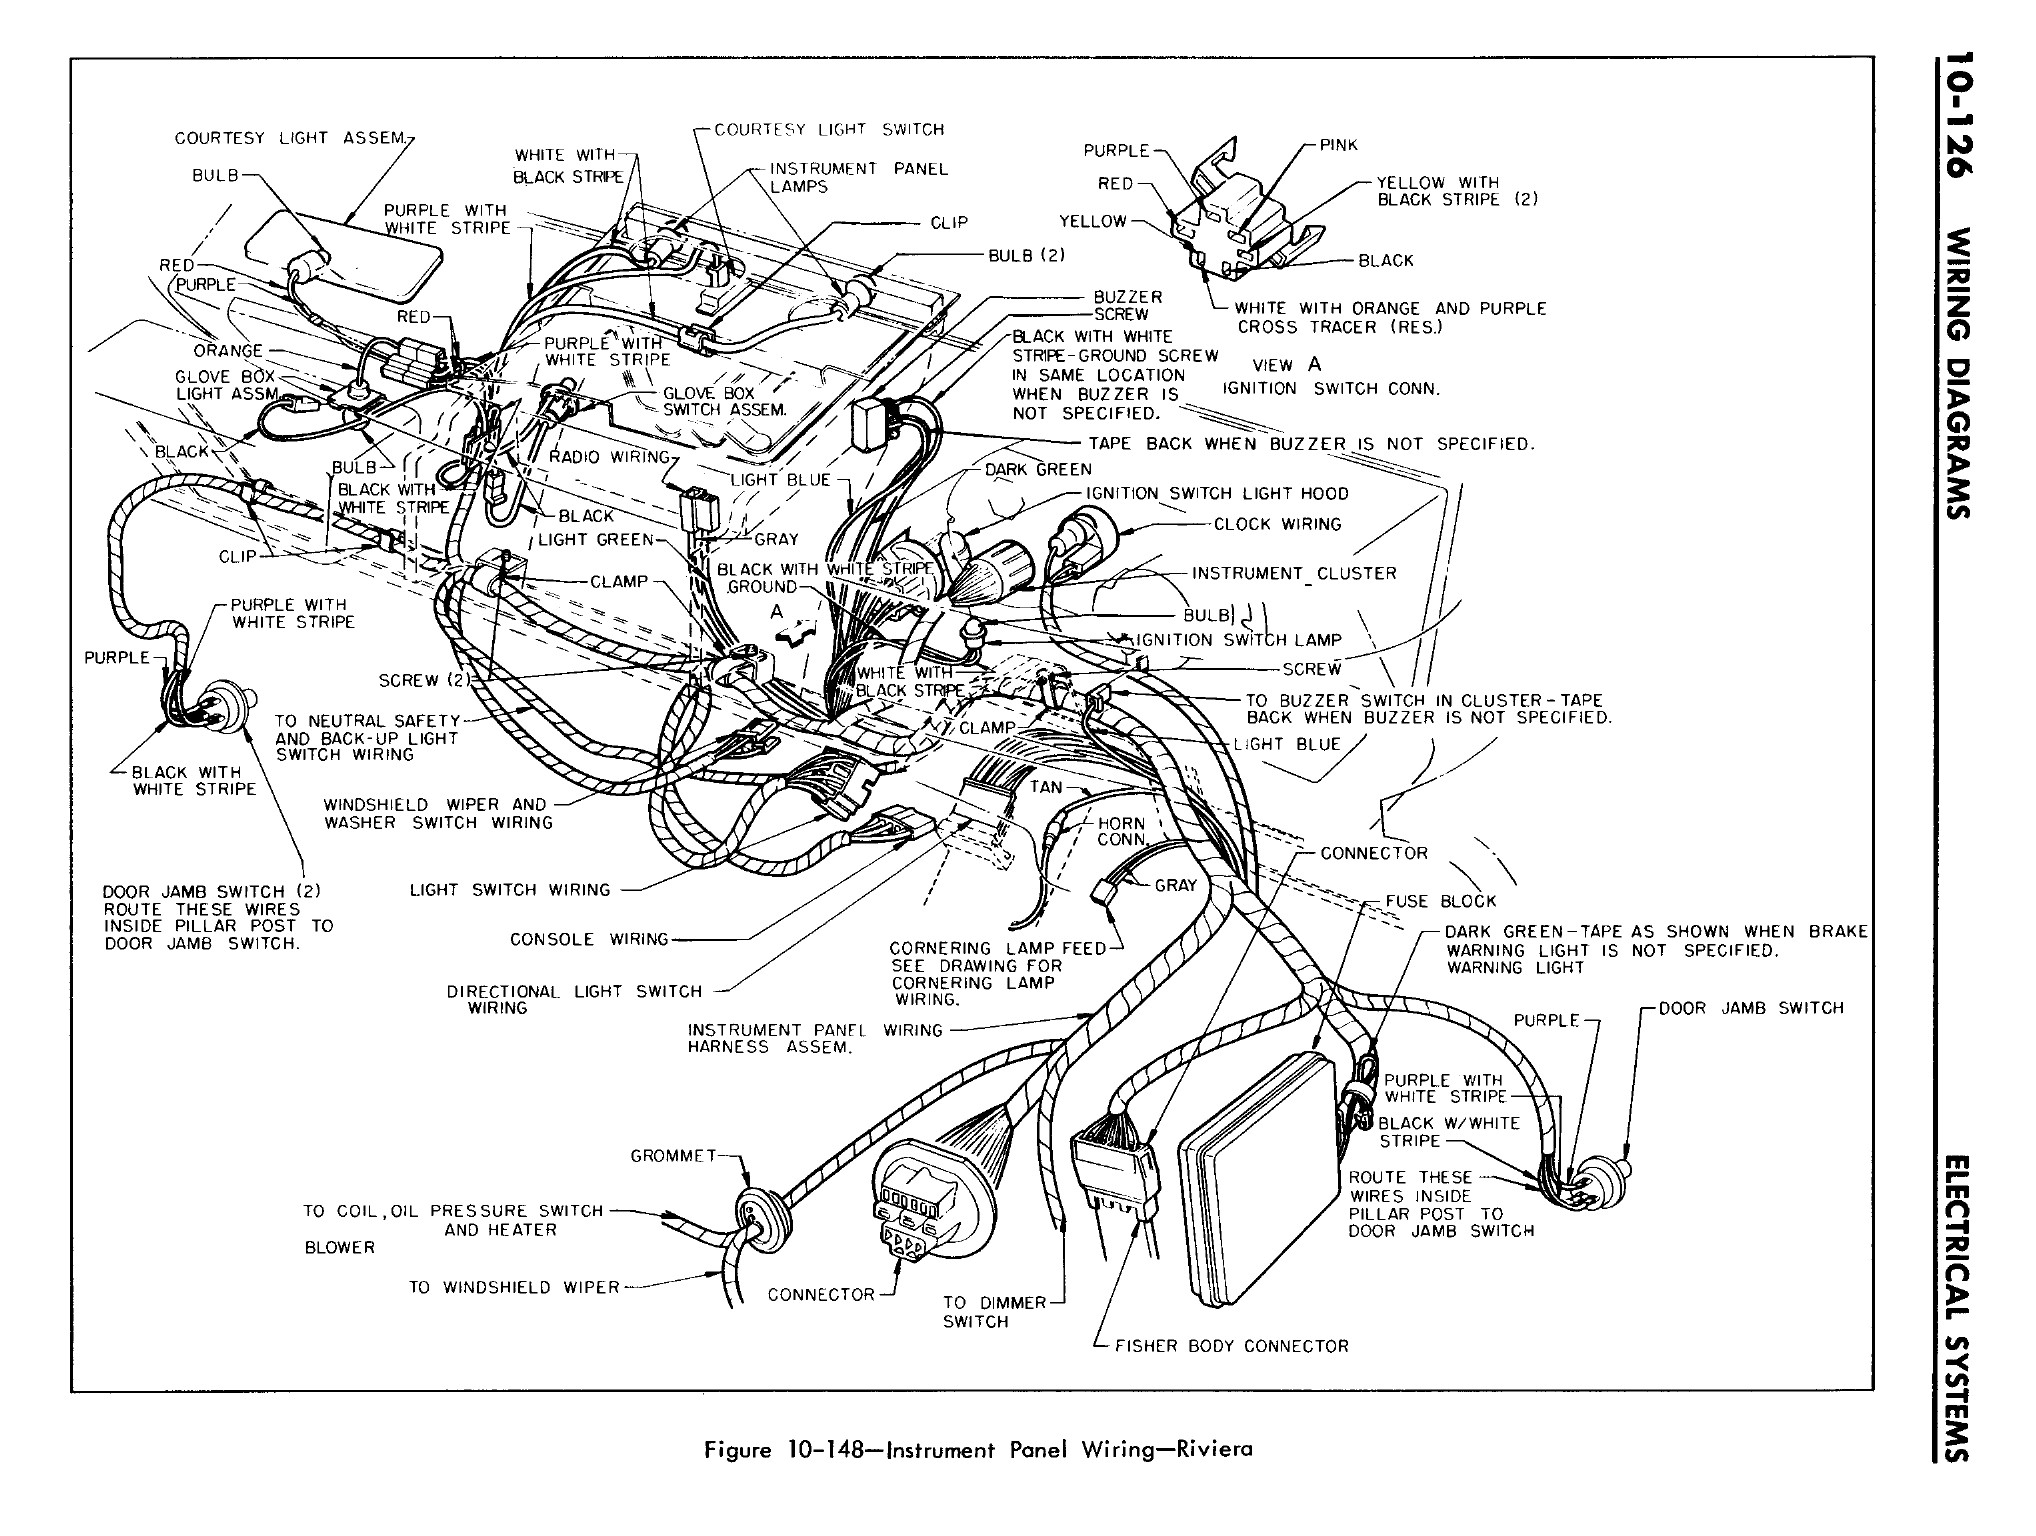 1963 Buick Chassis Service Manual - Electrical Systems Page 126 of 138